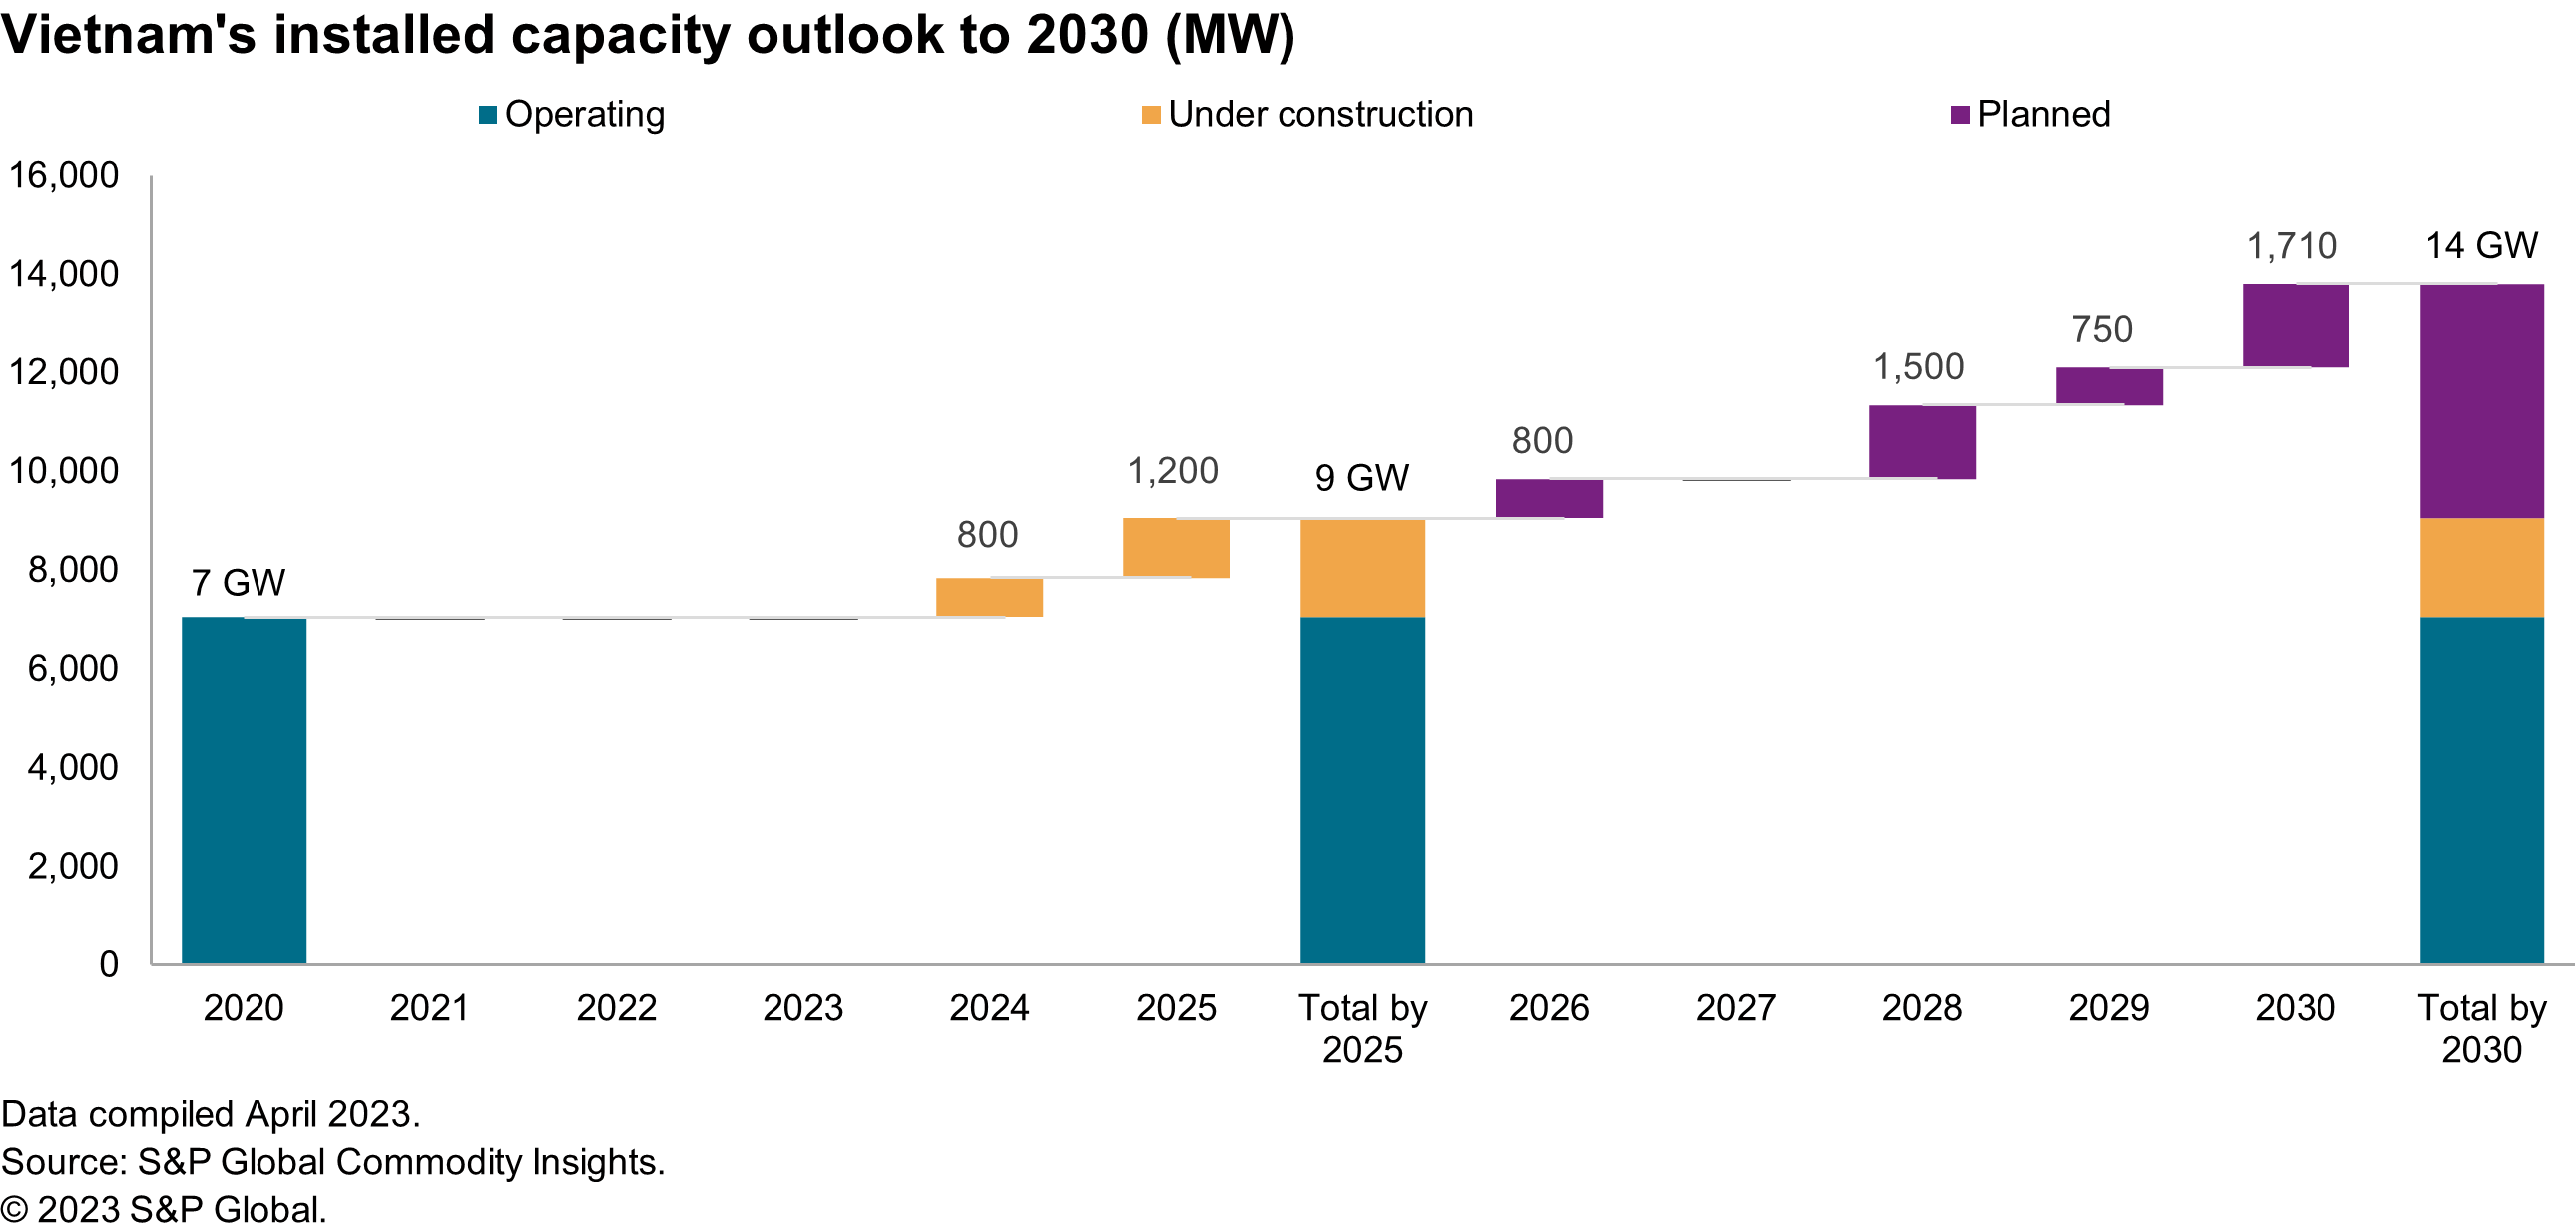 Vietnam's installed capacity outlook to 2030 (MW)